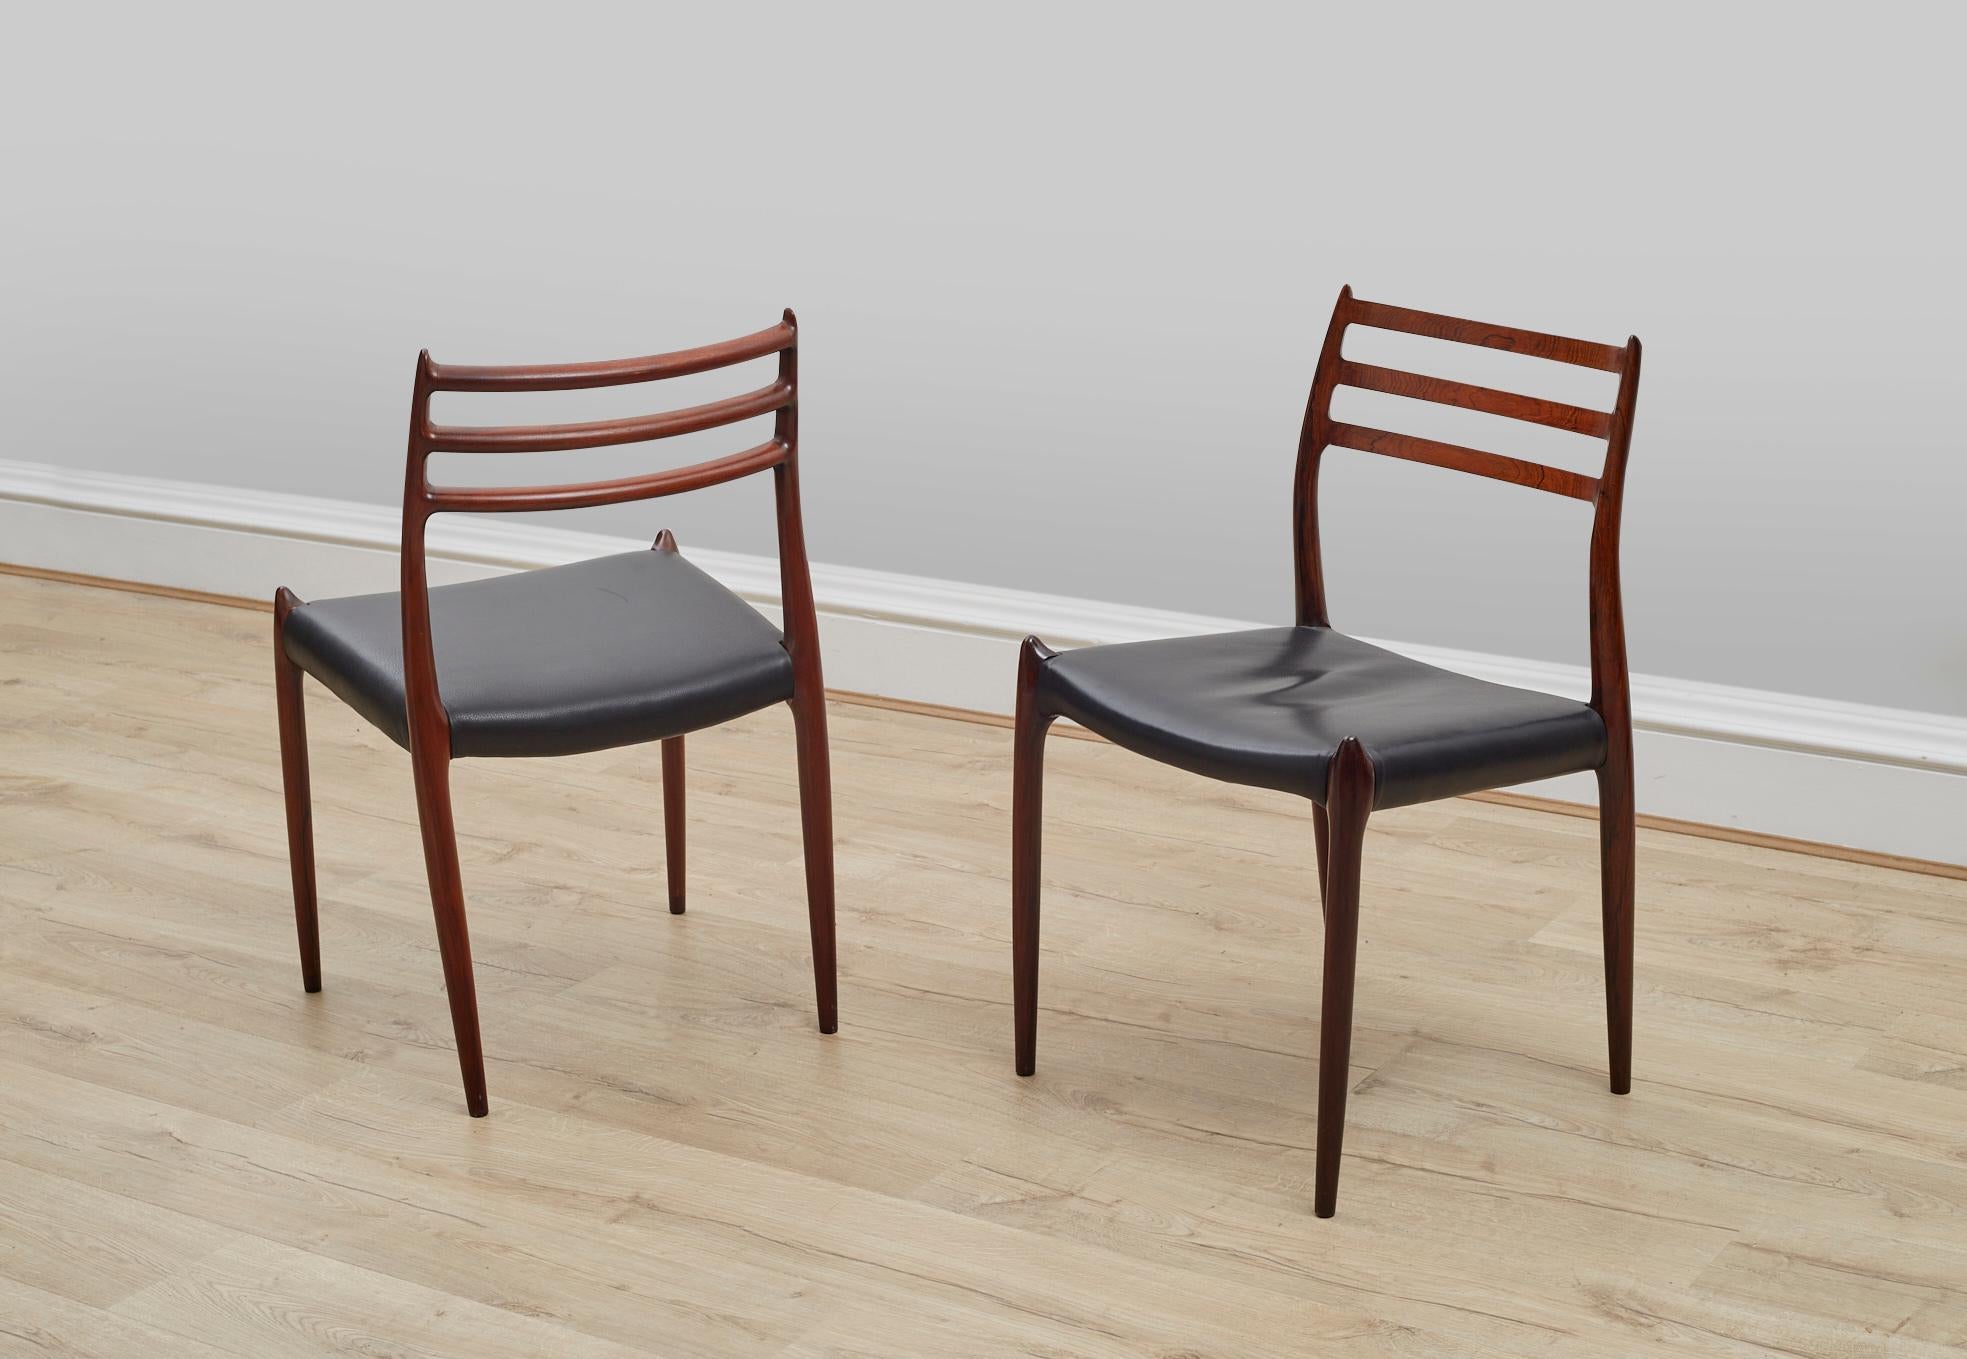 A set of two rosewood side chairs designed by Niels Otto Møller in 1962, each chair is stamped underneath, the chairs are in excellent condition throughout and have had new black leather upholstered seats.

